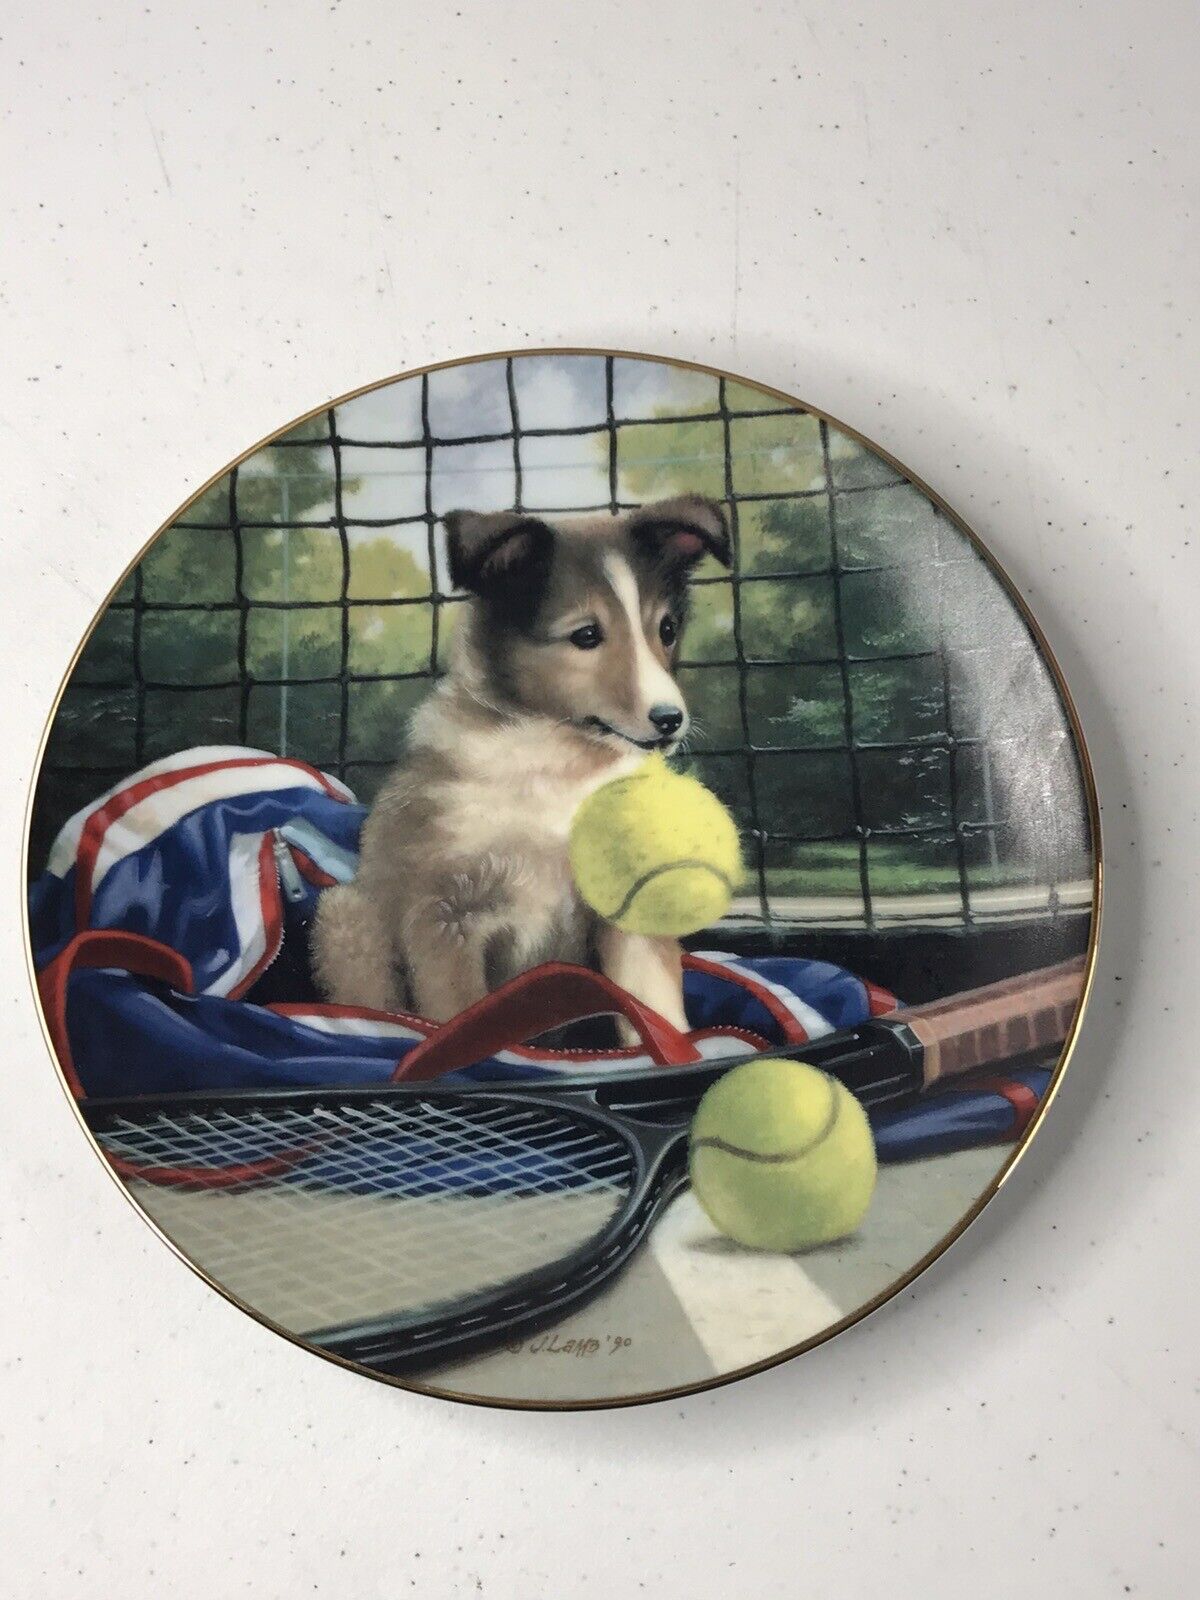 Net Play Good Sports Plate Collection Decorative Plate Limited Ed 1990 # 3078A